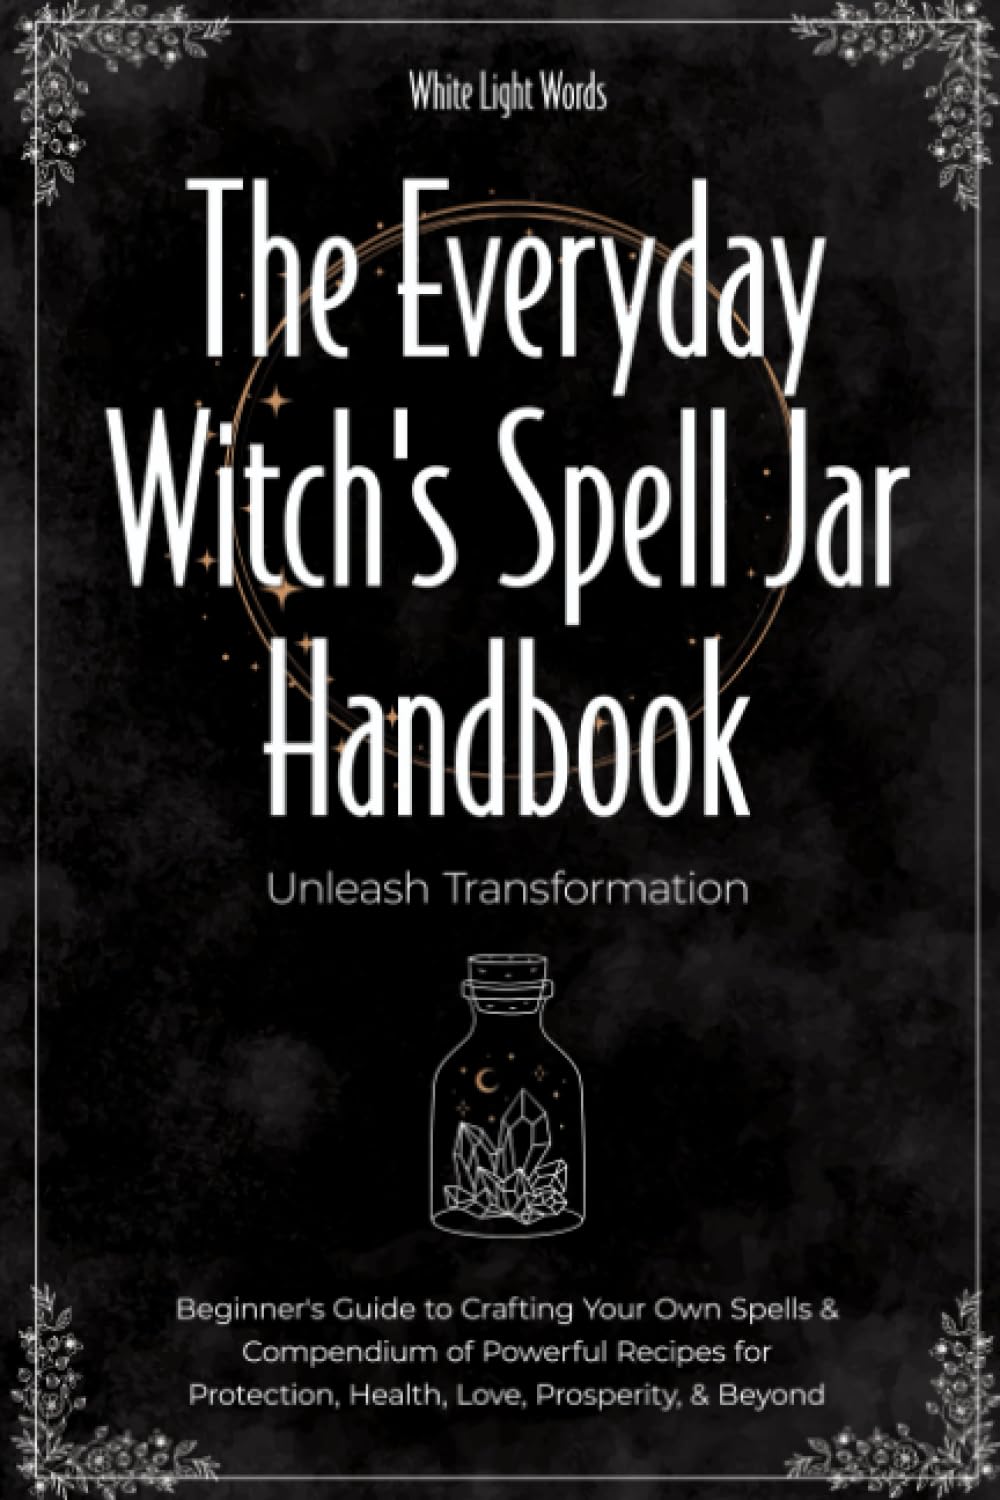 The Everyday Witch's Spell Jar Handbook: Unleash Transformation - Beginner's Guide To Crafting Your Own Spells & Compendium Of Powerful Recipes For Protection, Health, Love, Prosperity, & Beyond